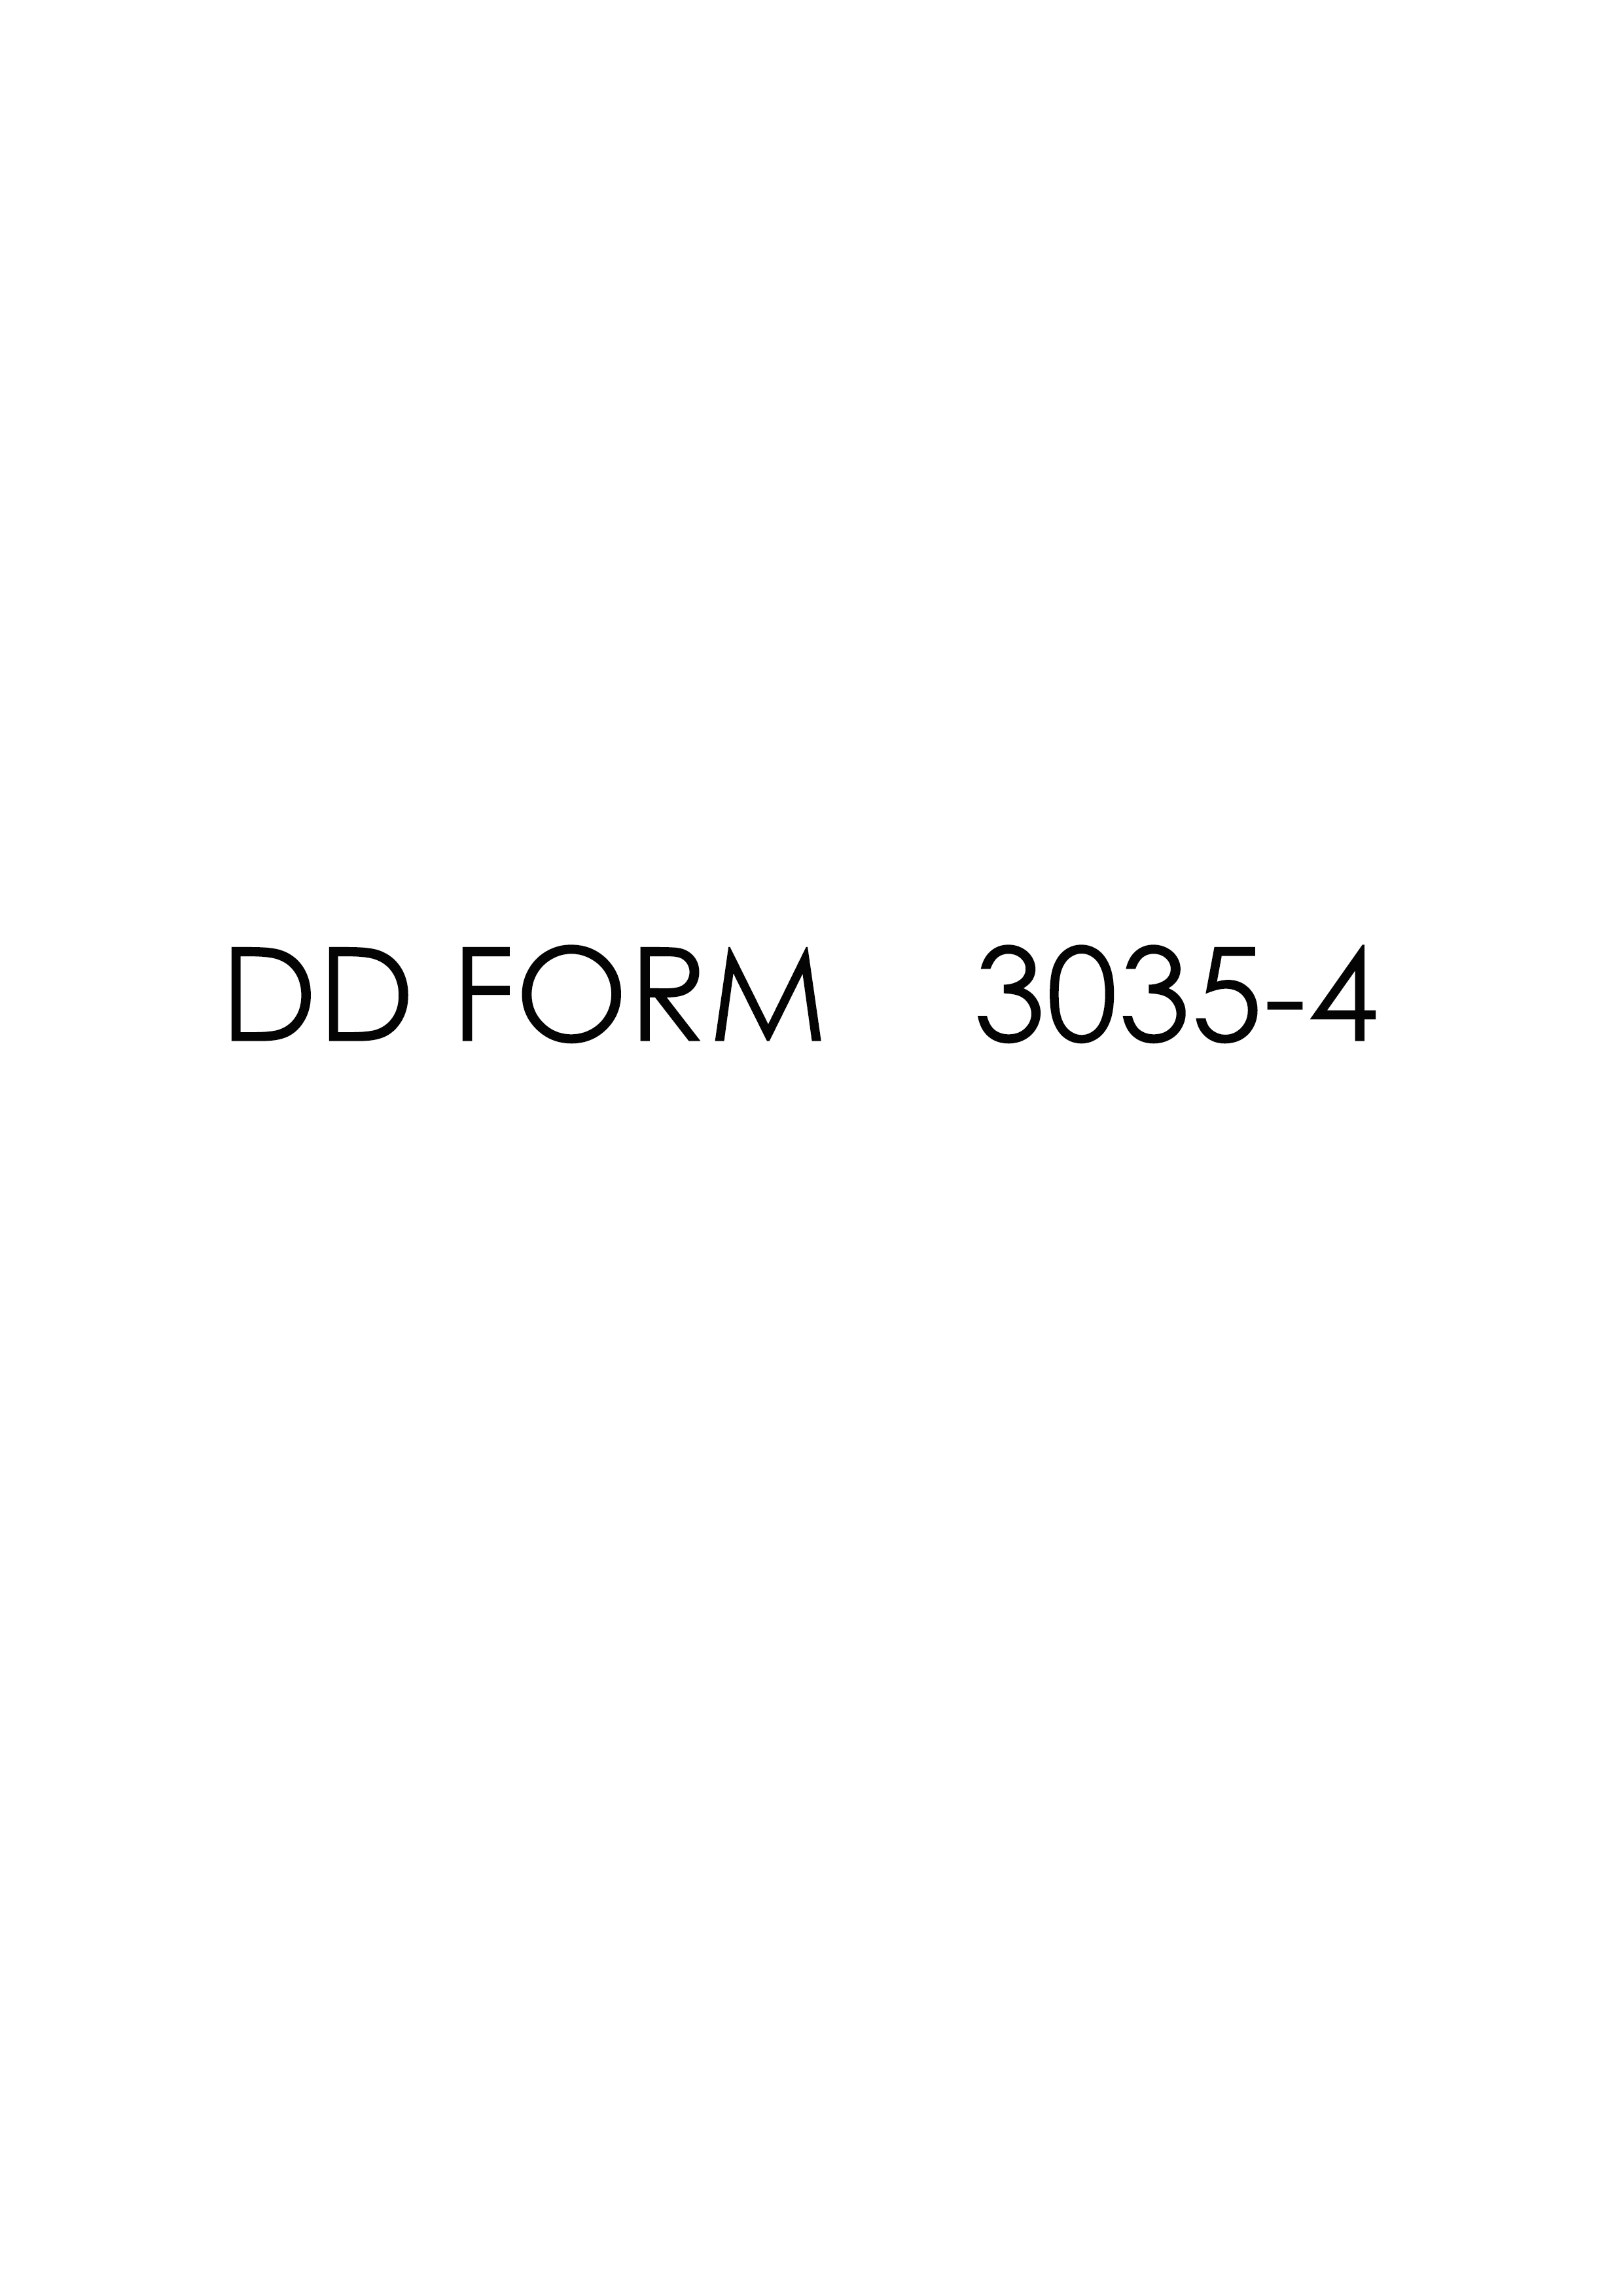 Download Fillable dd Form 3035-4